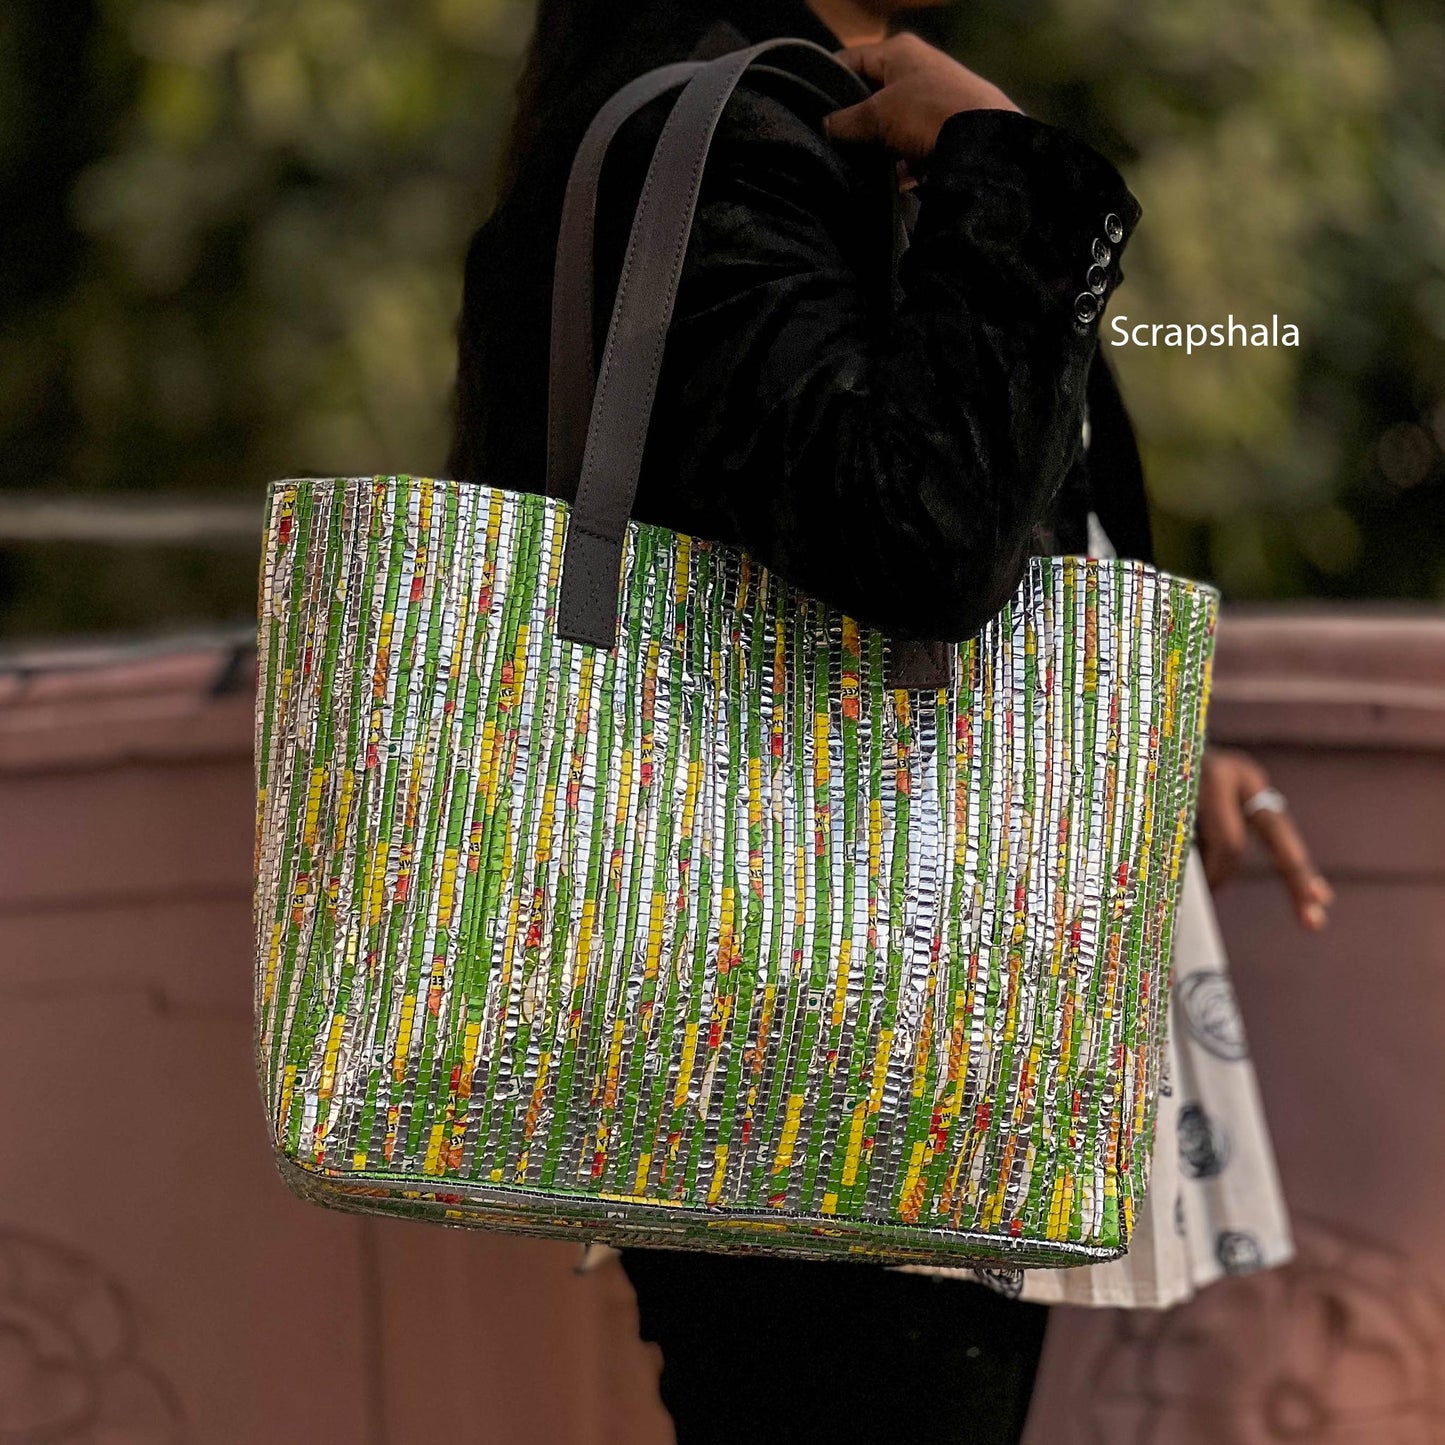 Tote Bag | Light-weight | Water-proof | Upcycled Plastic | Handloom Textile | Scrapshala